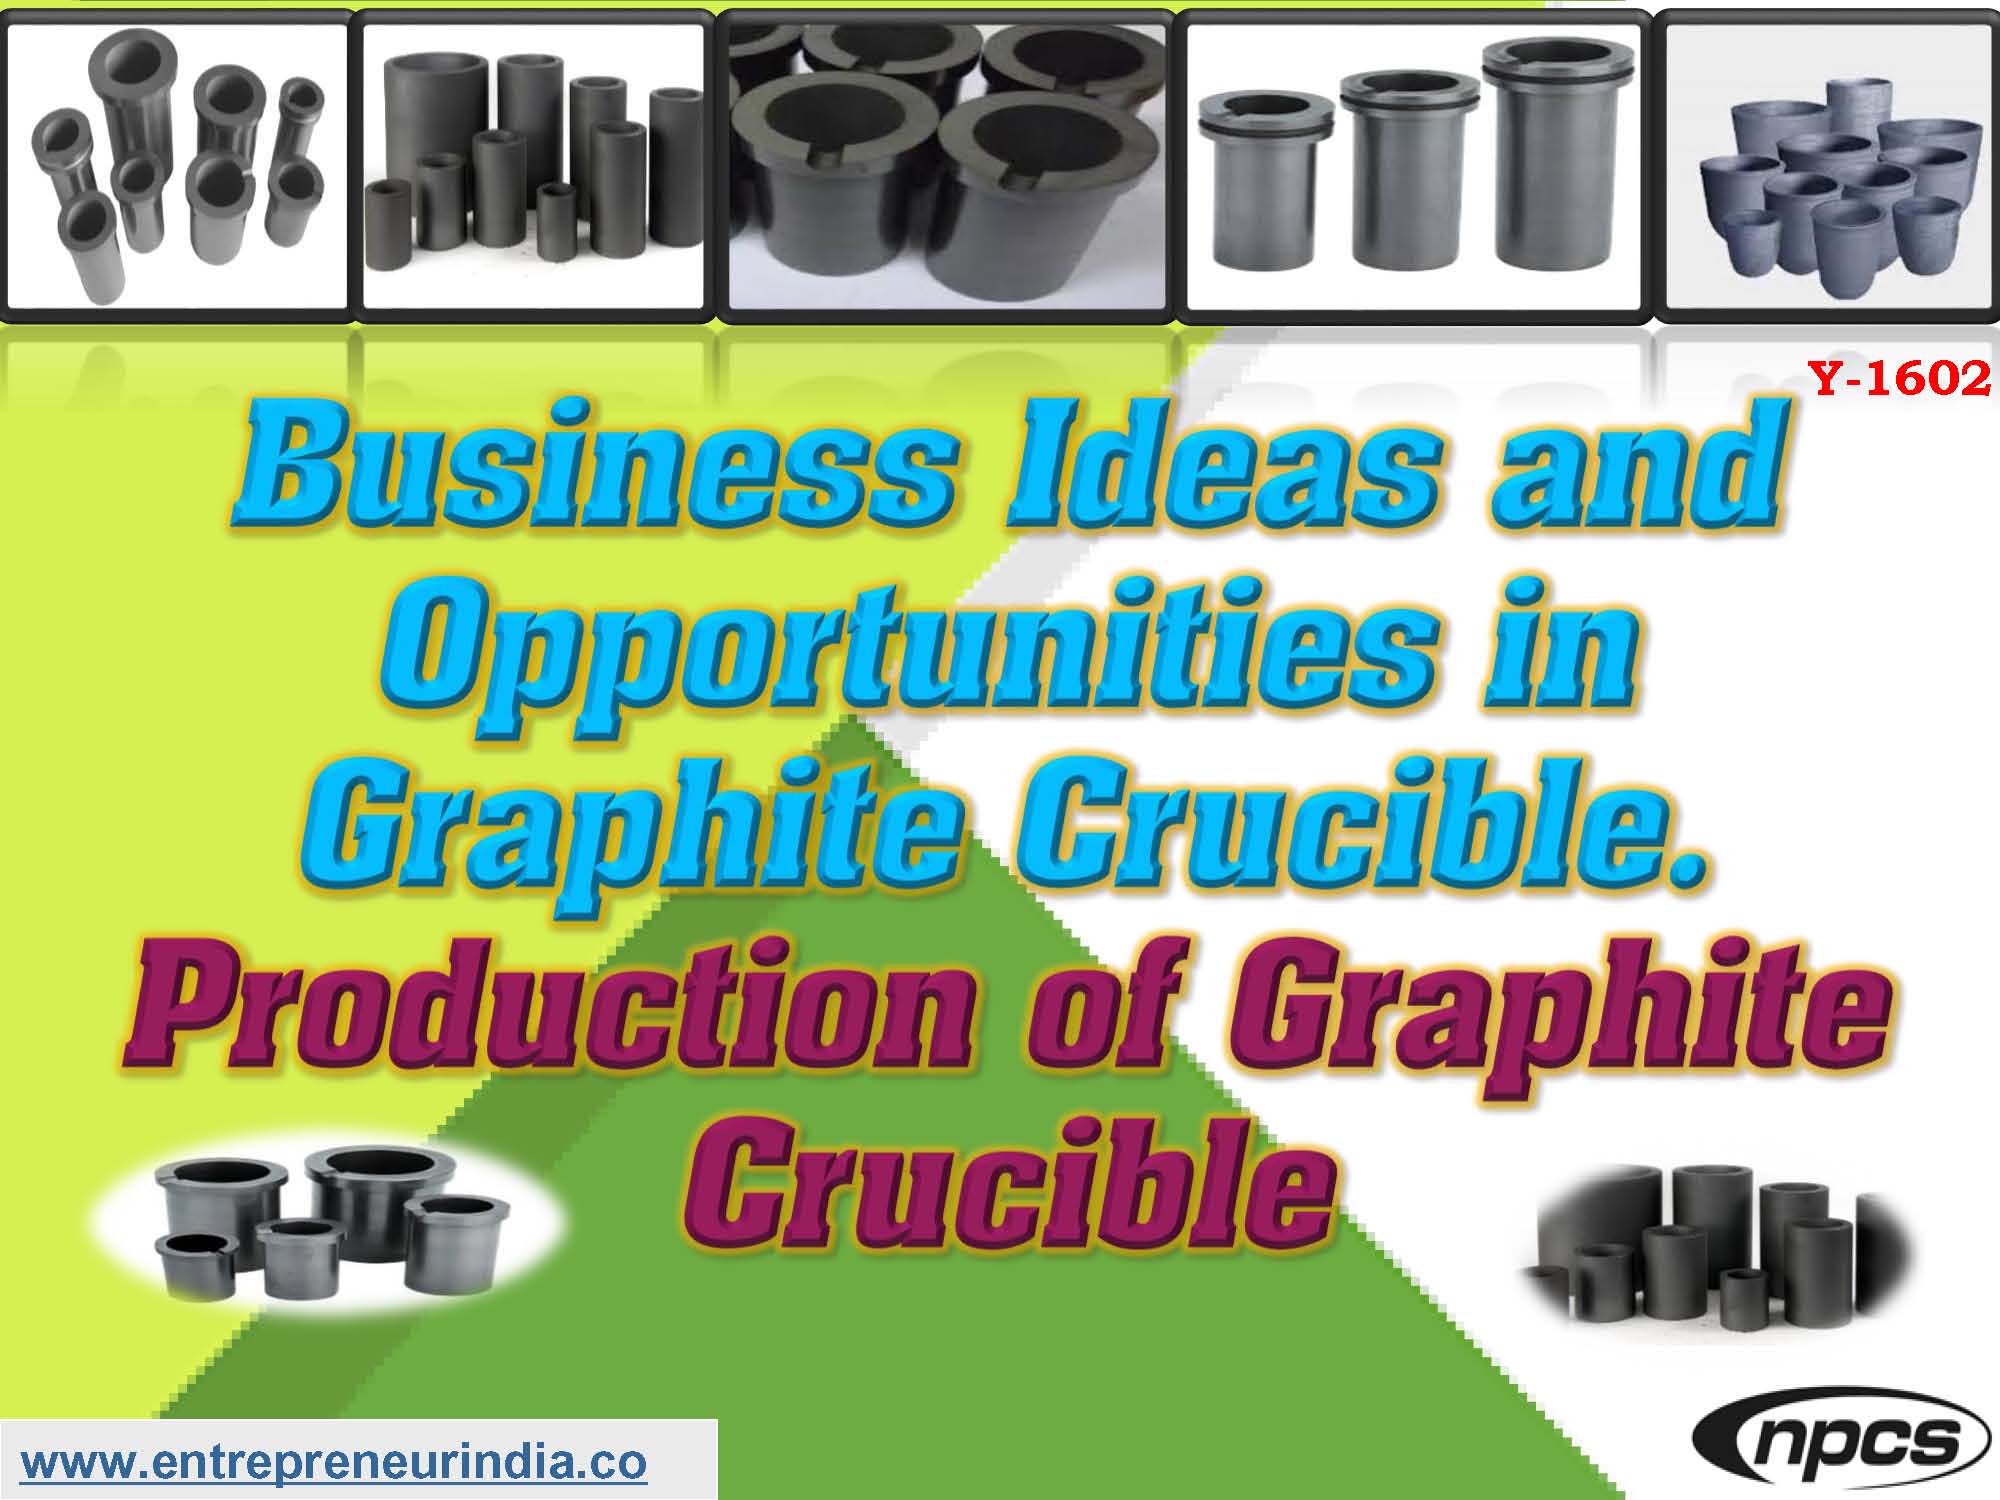 Business Ideas and Opportunities in Graphite Crucible